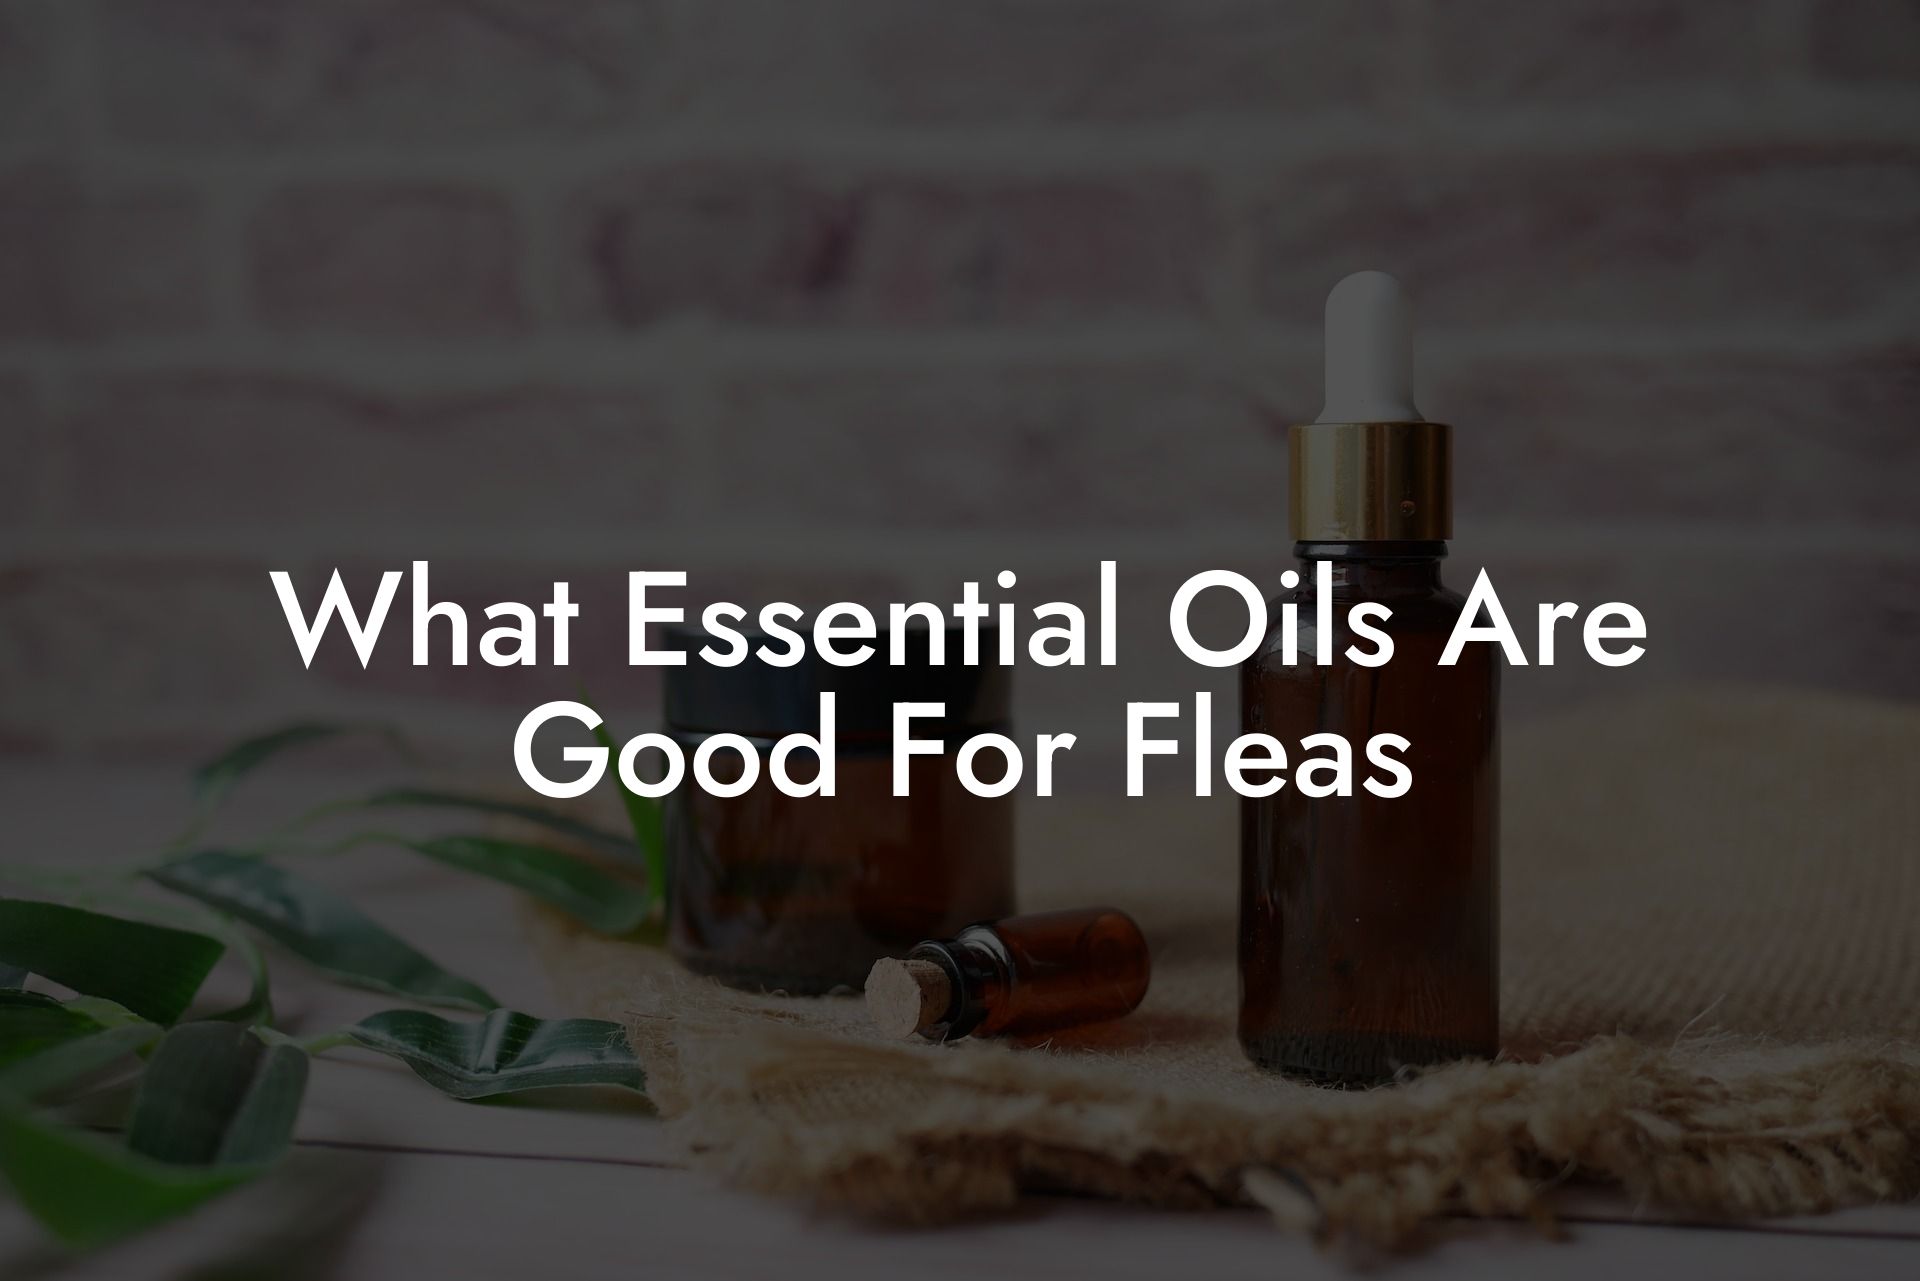 What Essential Oils Are Good For Fleas